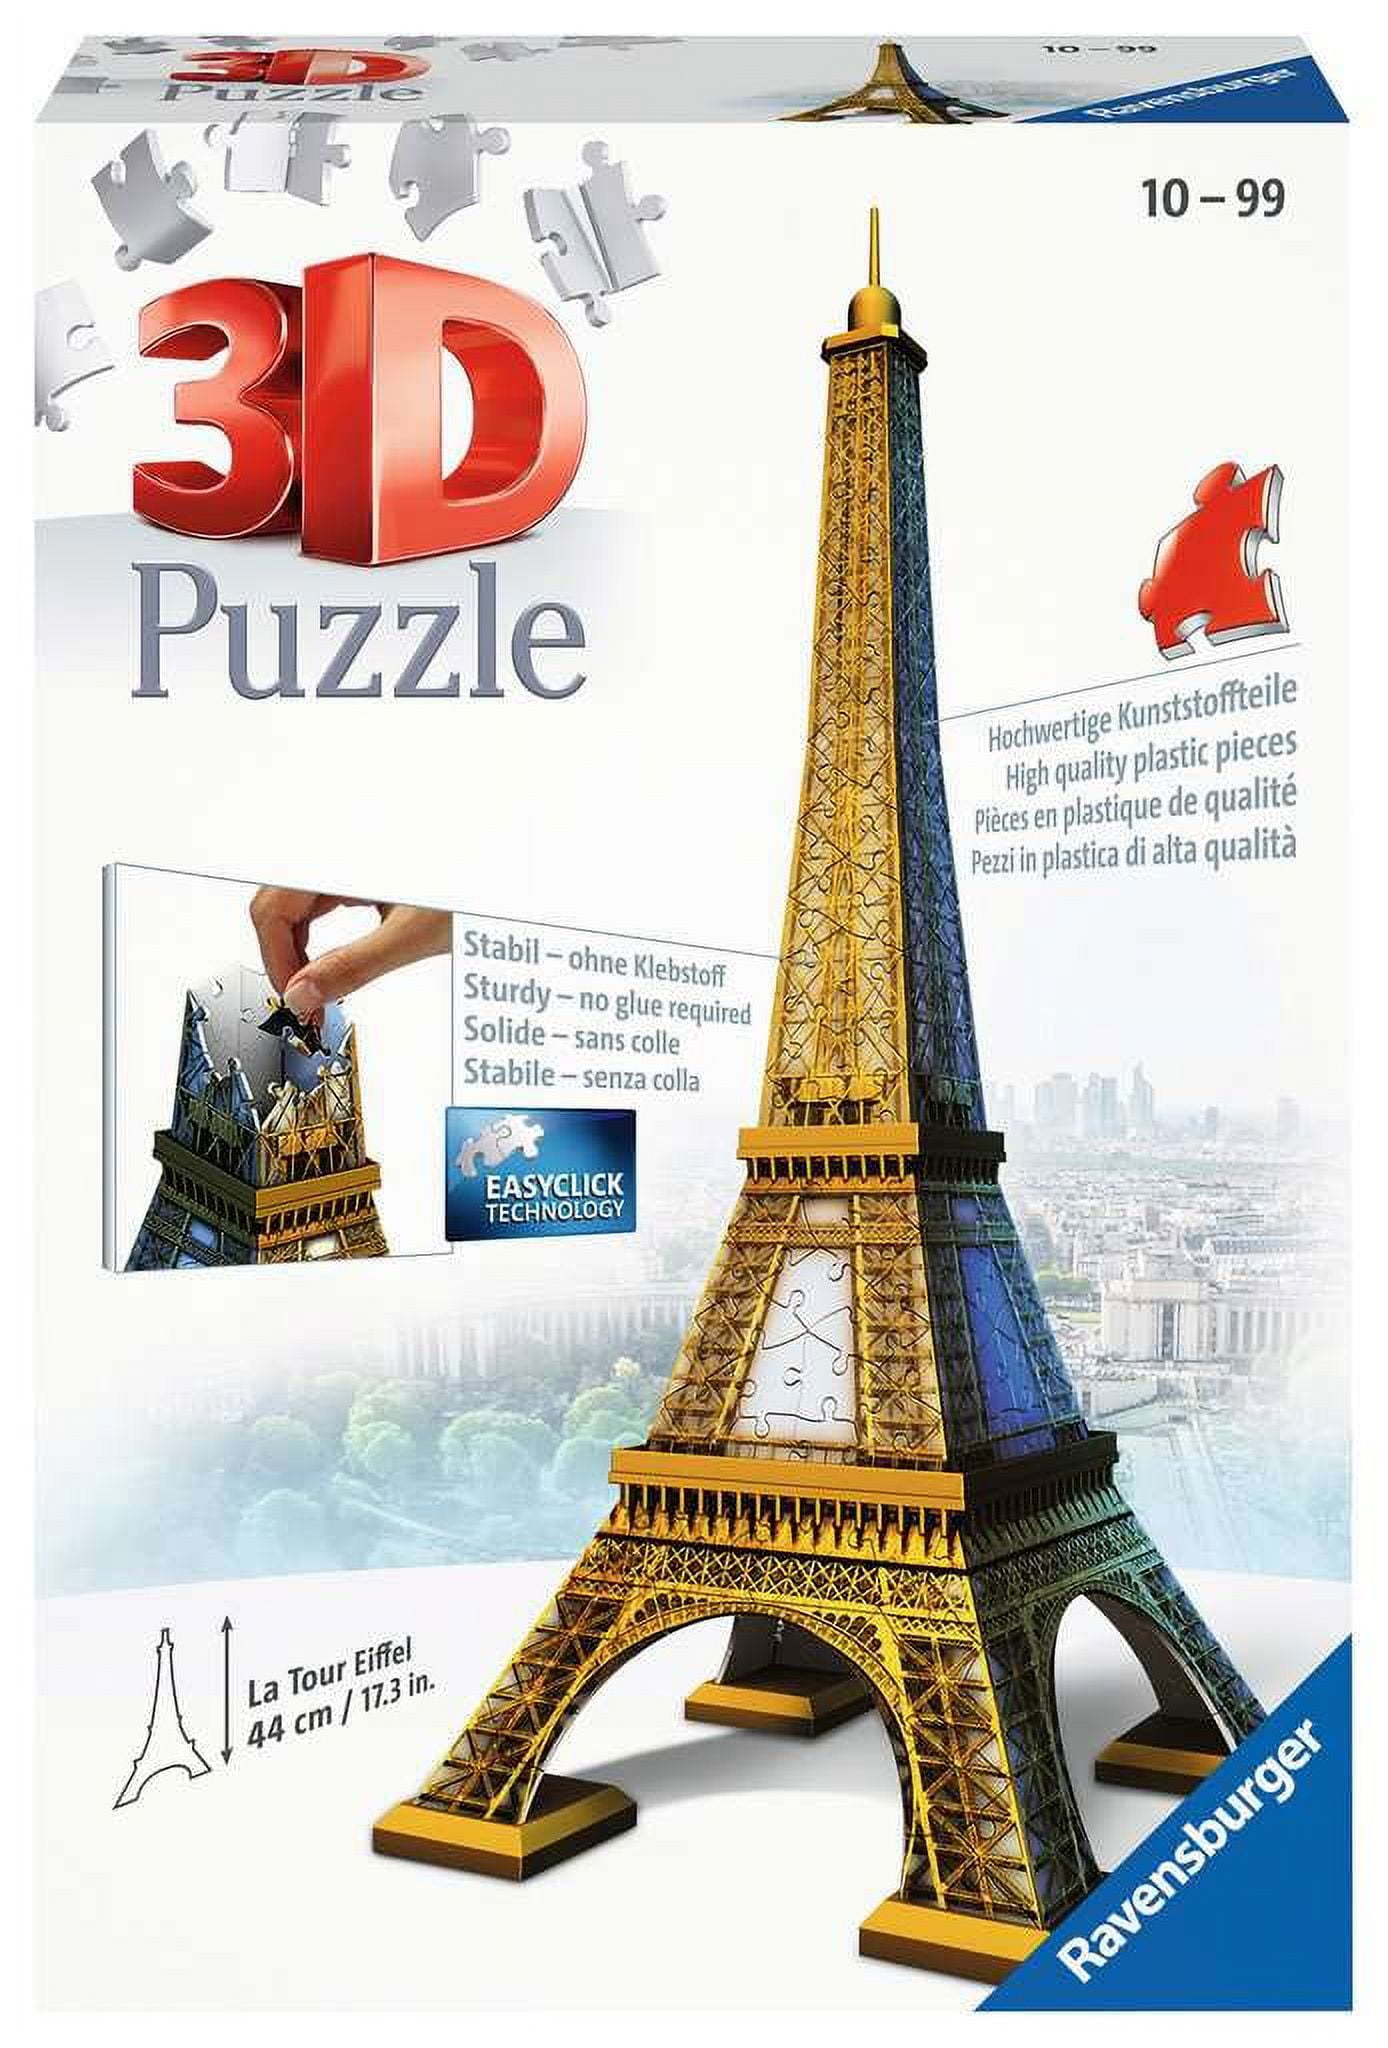 Empire State Building at Night, 3D Puzzle Buildings, 3D Puzzles, Products